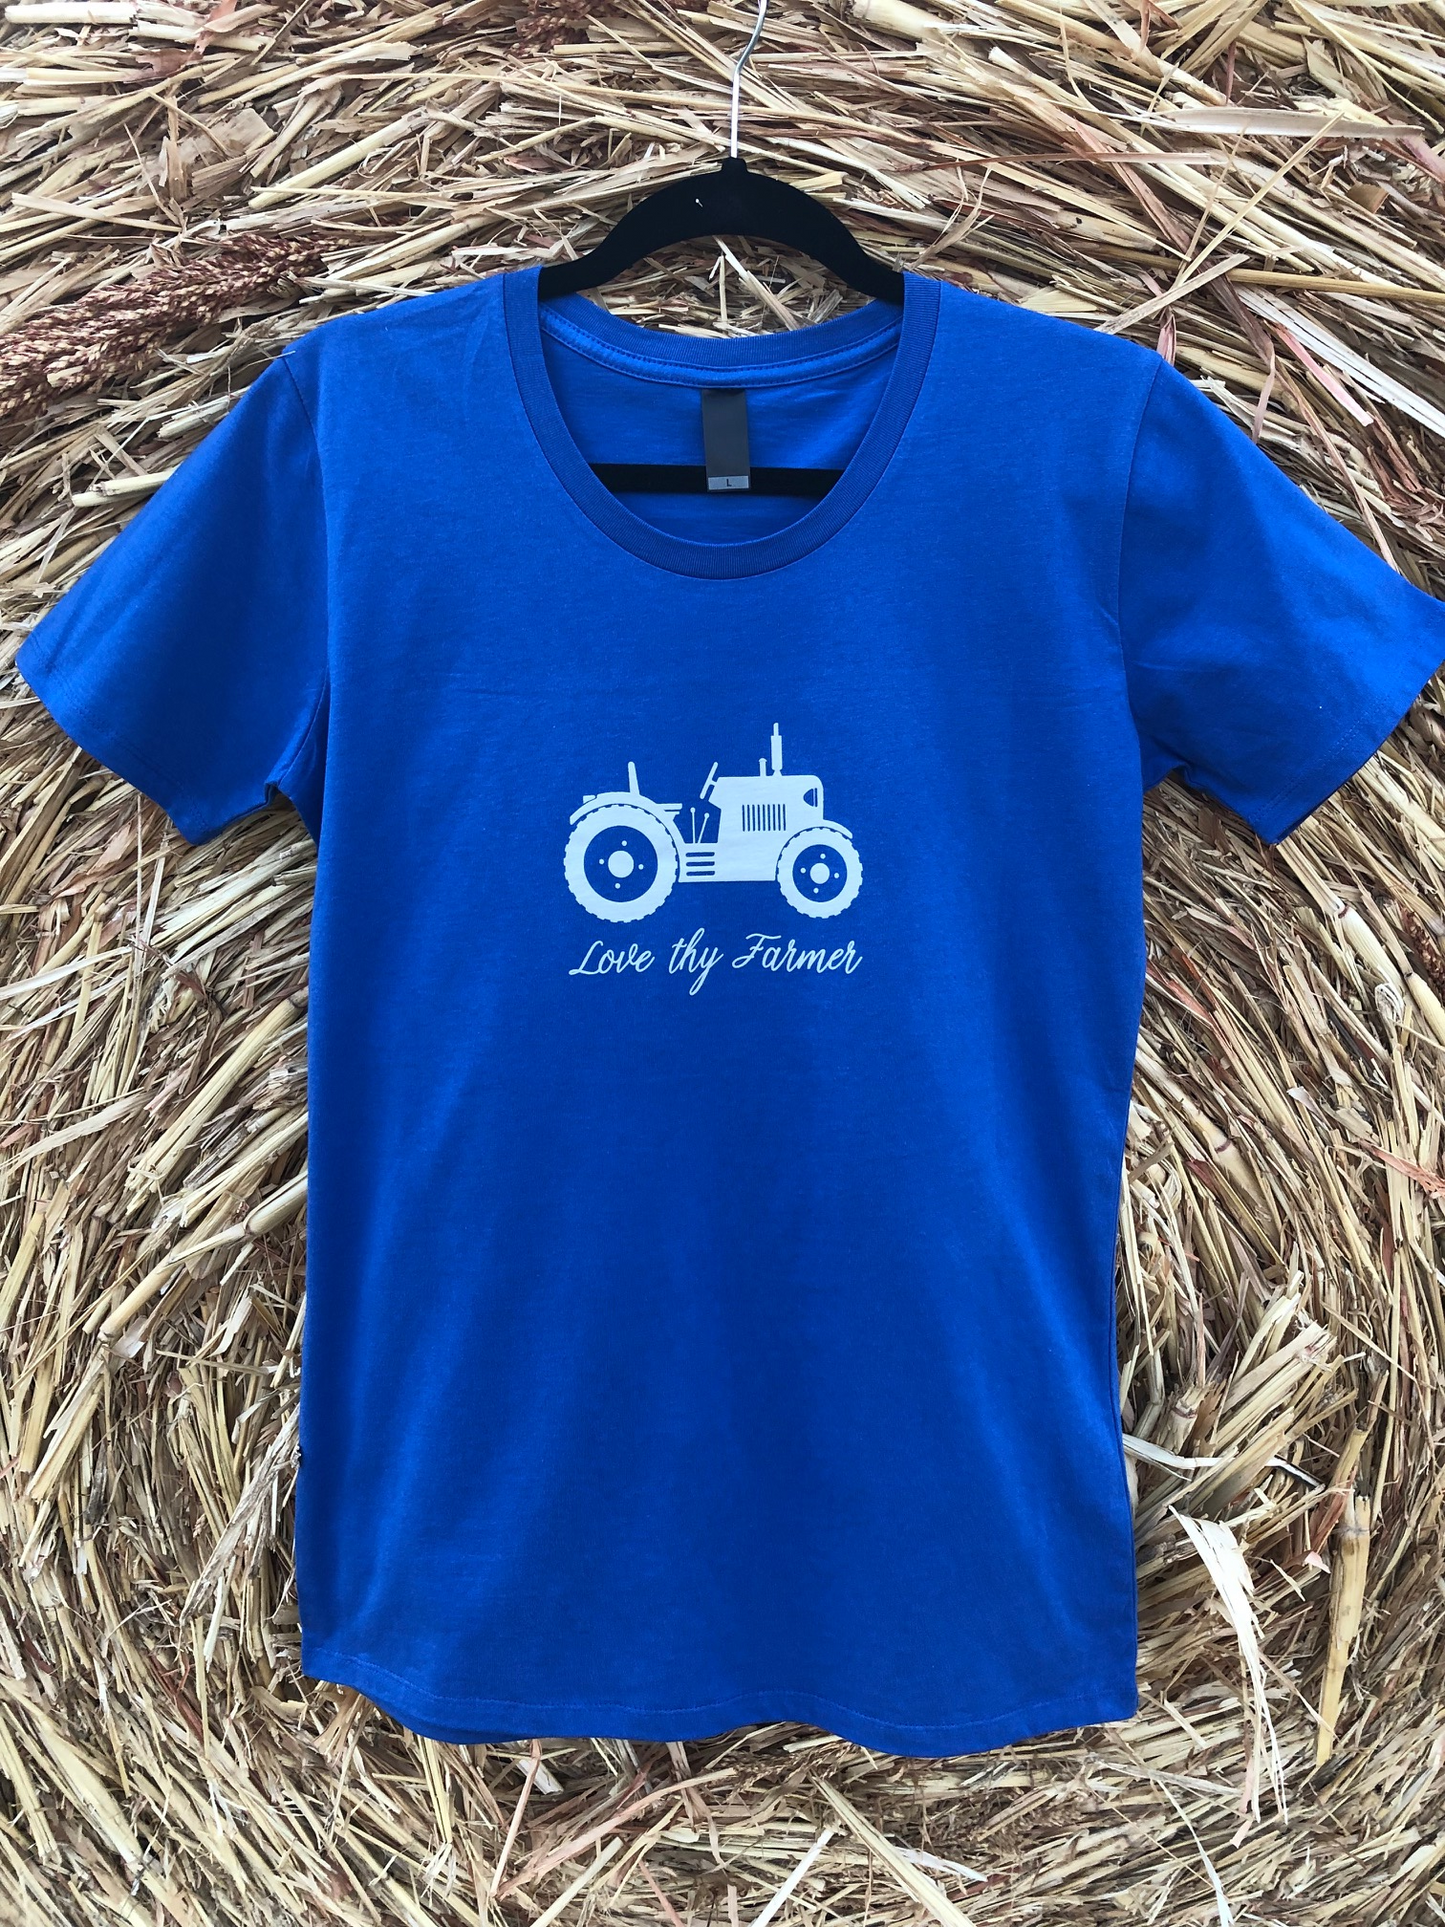 Ladies' Short Sleeve Tractor T-Shirt in Red/Royal Blue with Sand Printing